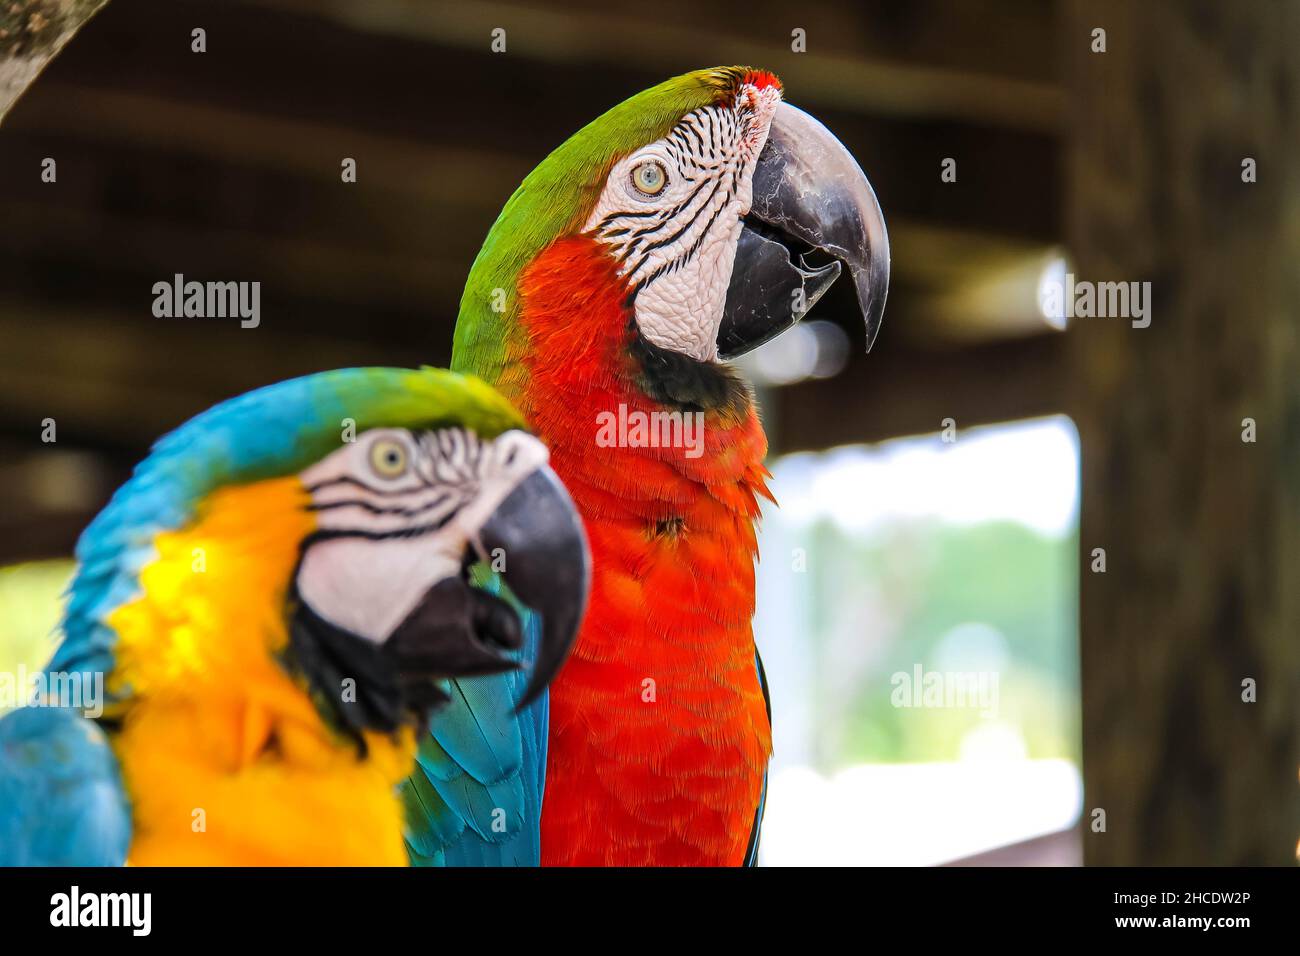 Closeup of the two macaws. Harlequin macaw, blue-and-yellow macaw. Stock Photo